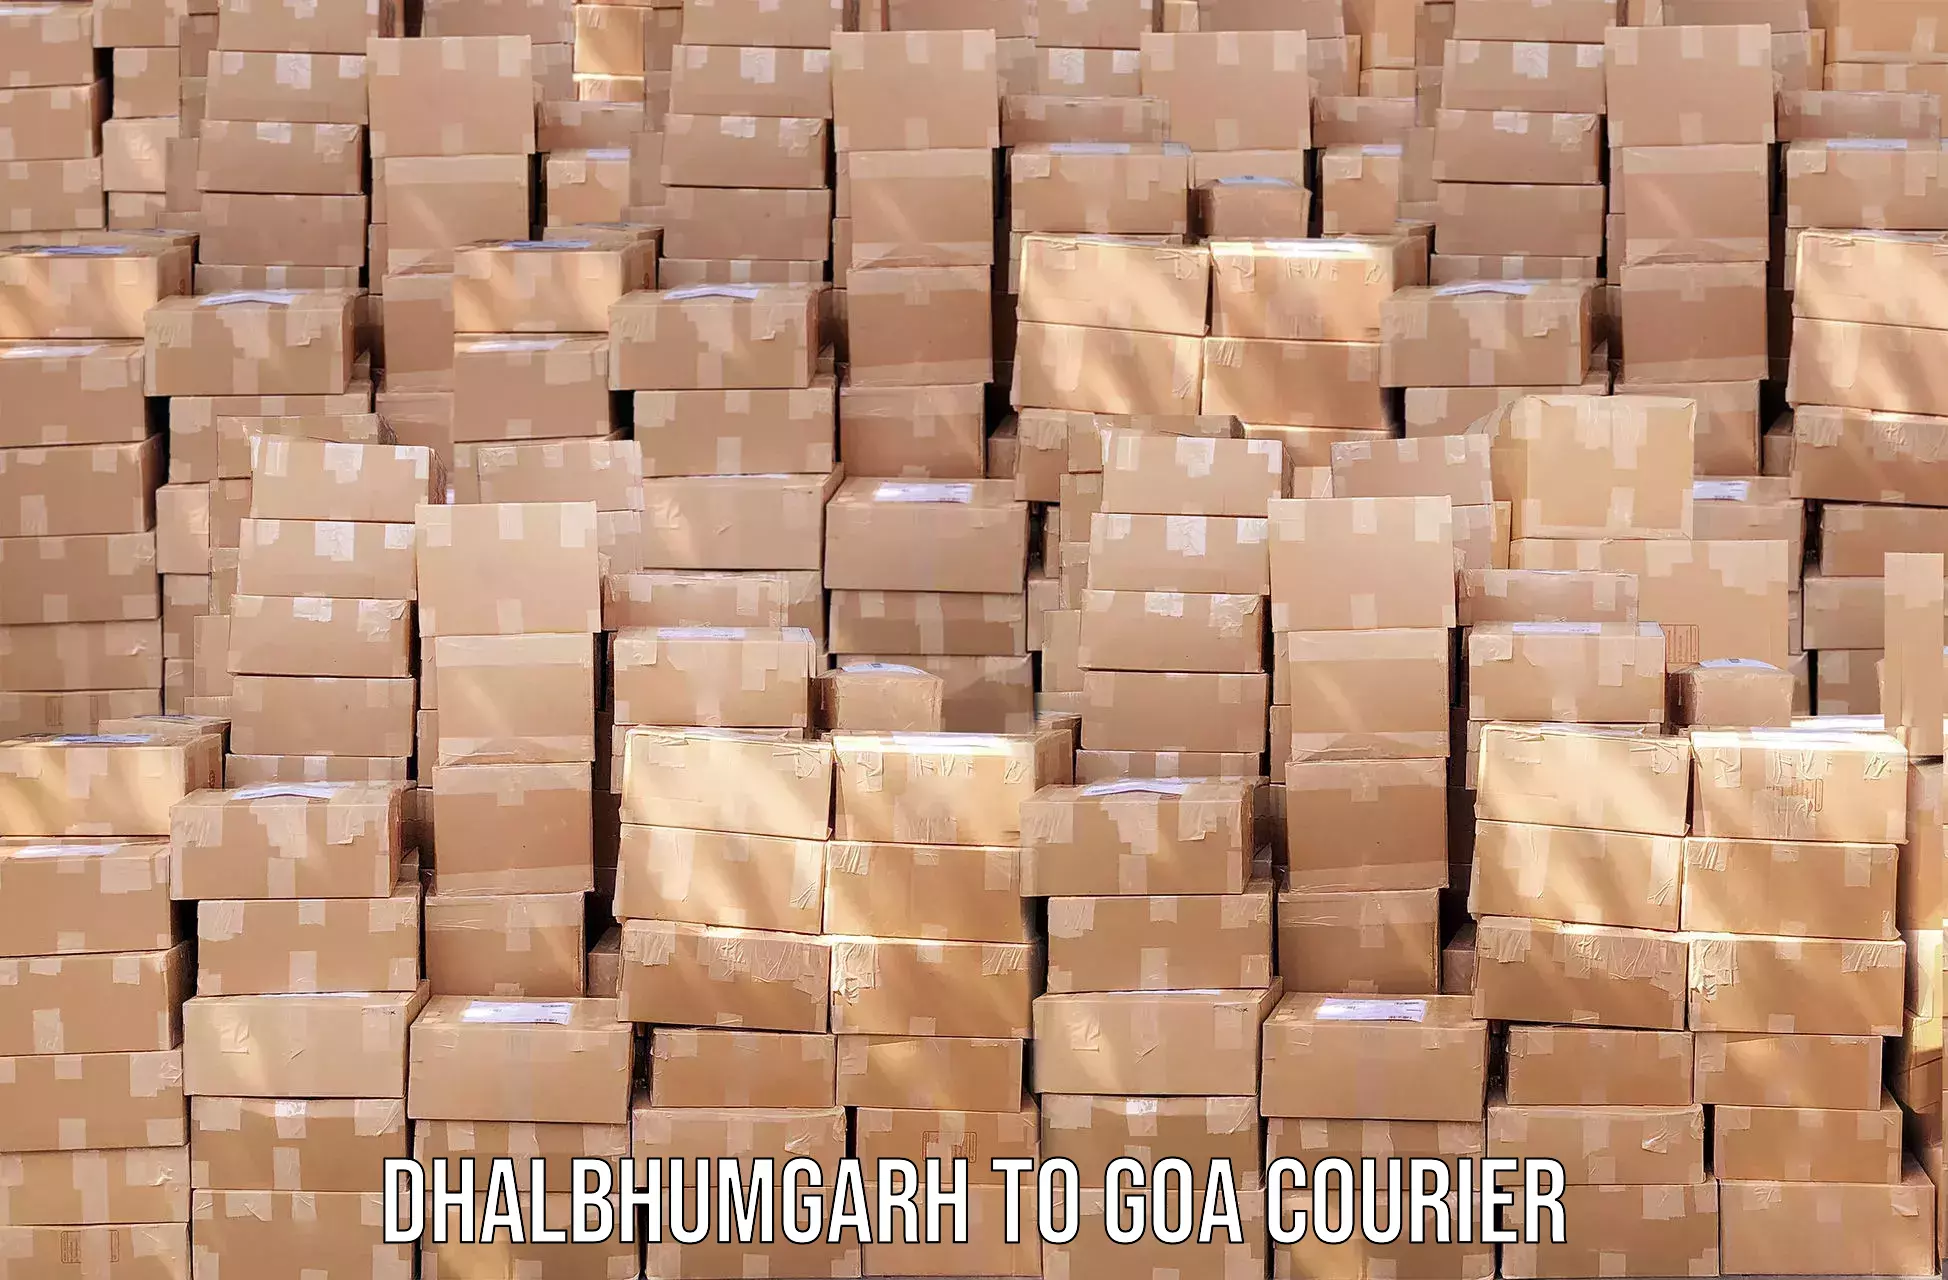 Local delivery service Dhalbhumgarh to Goa